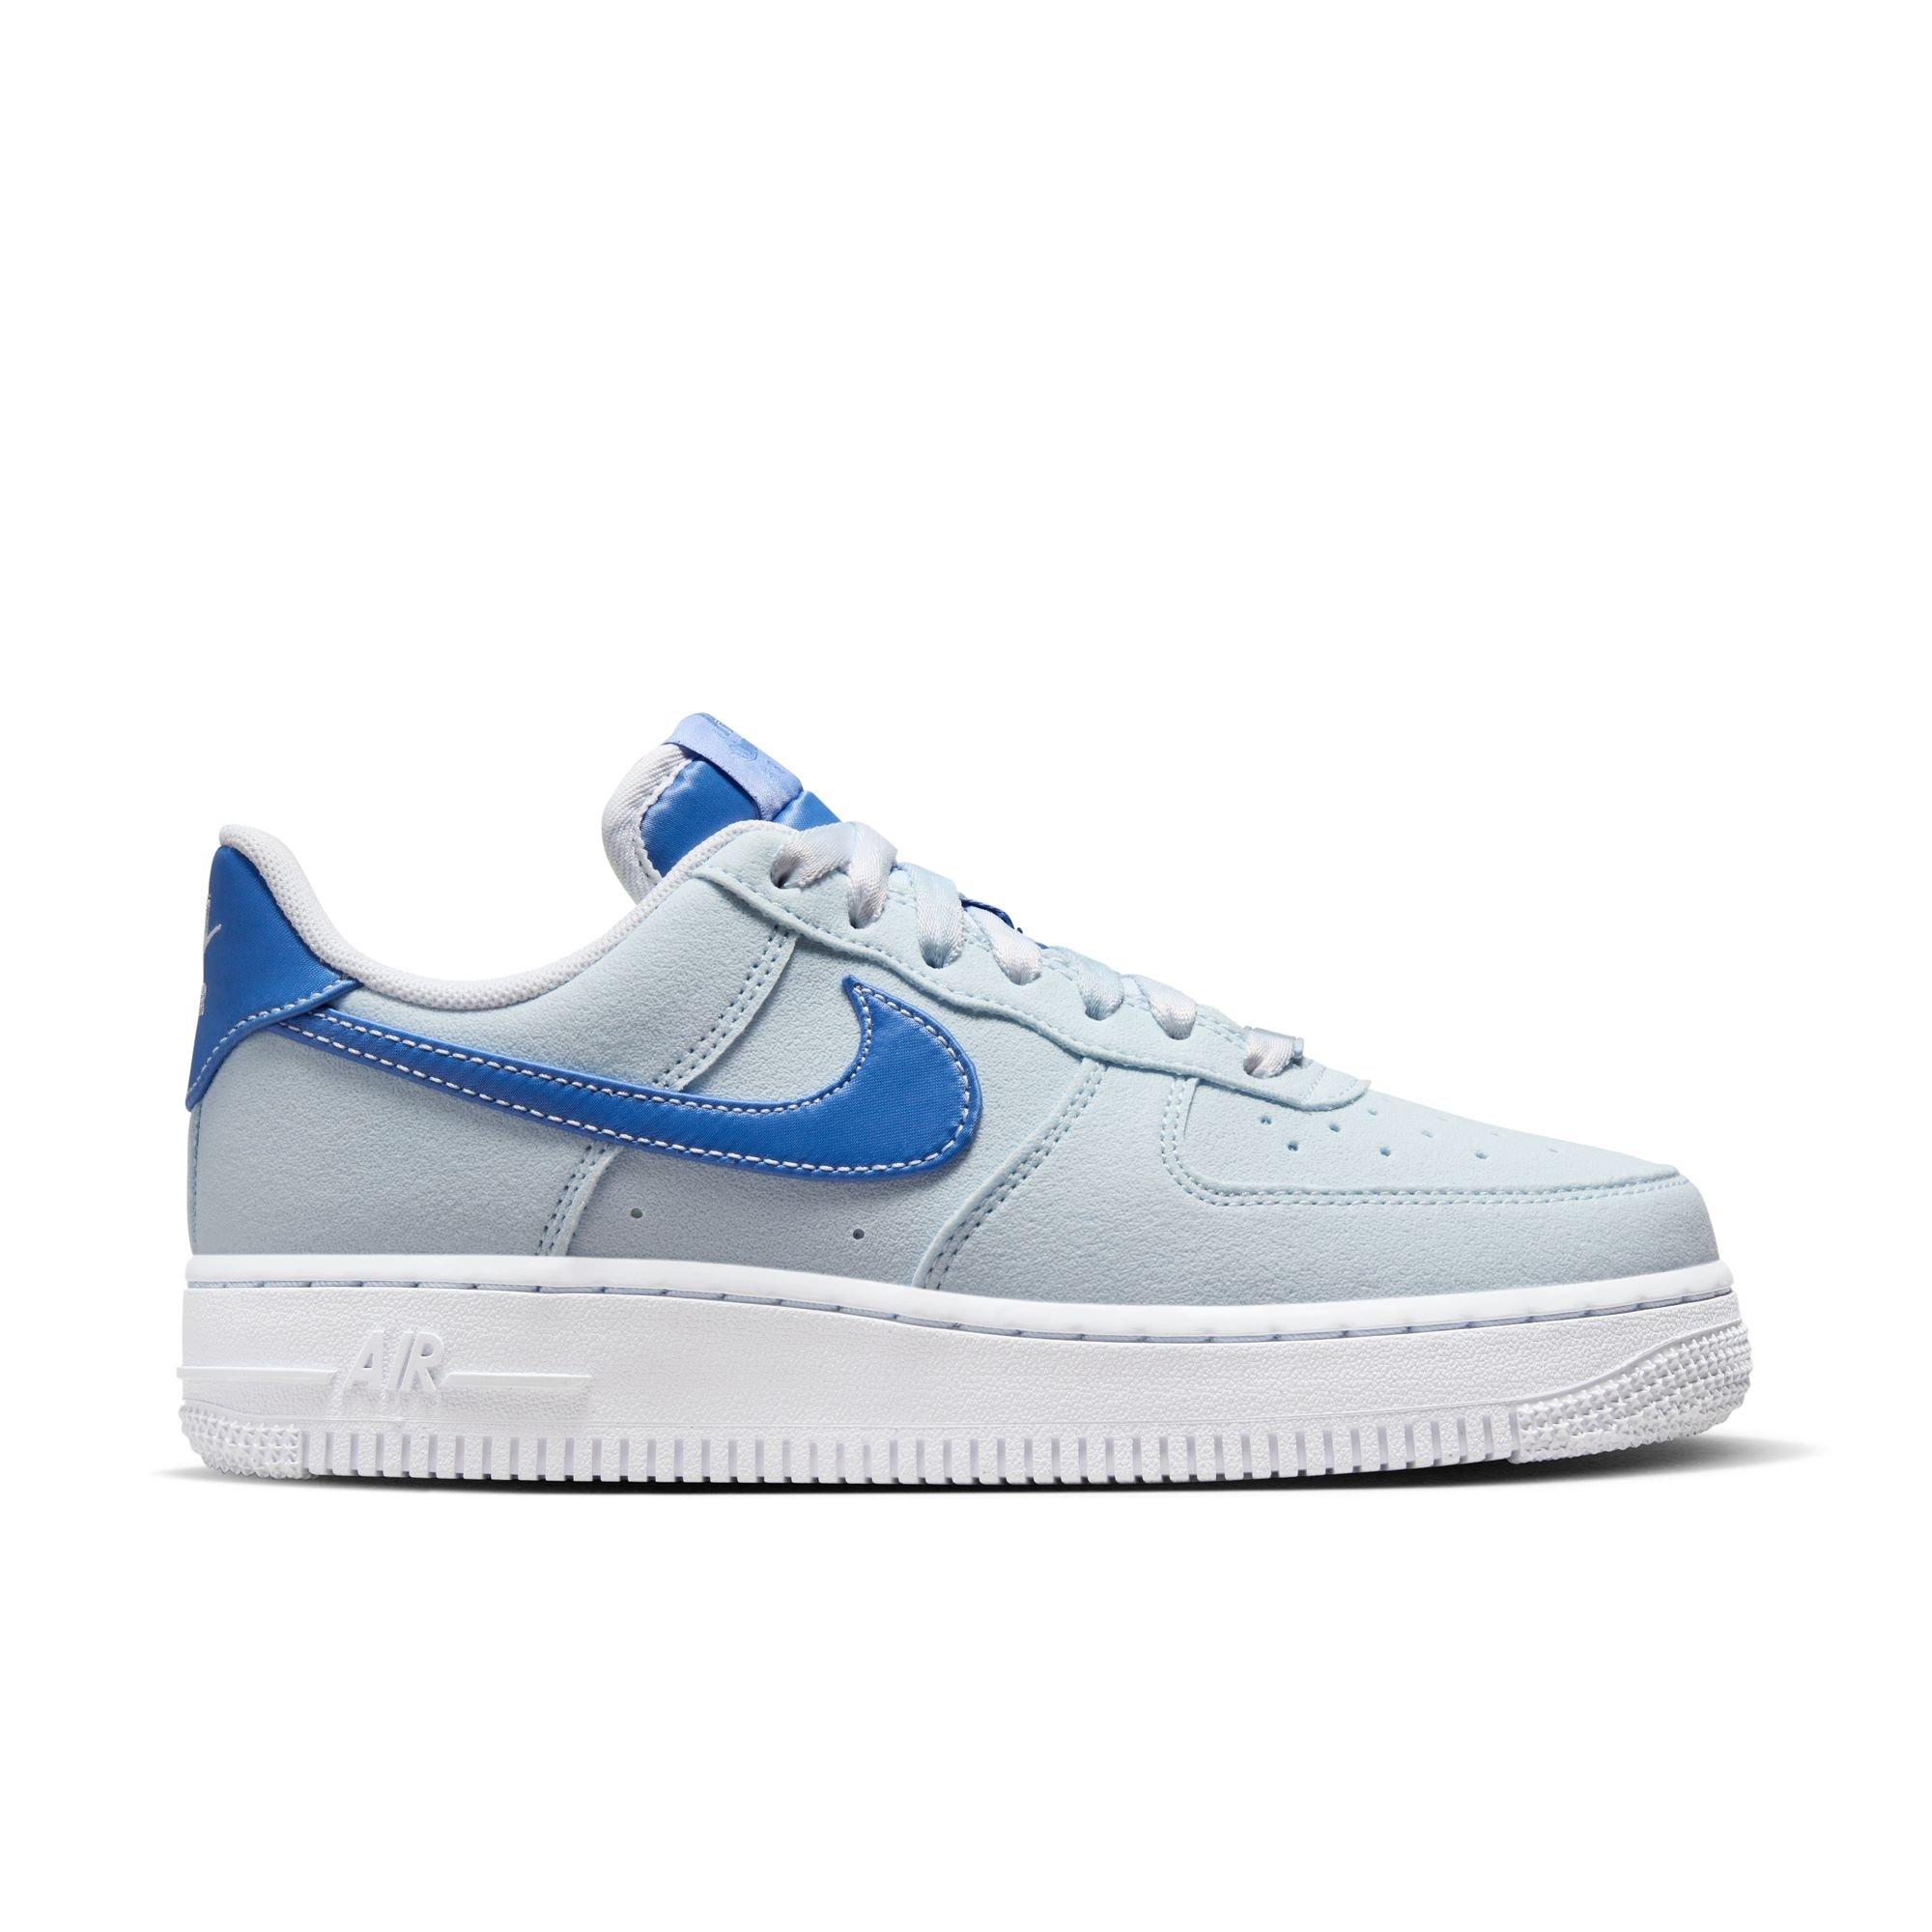 Hibbett on X: Is the Air Force 1 the world's most recognizable